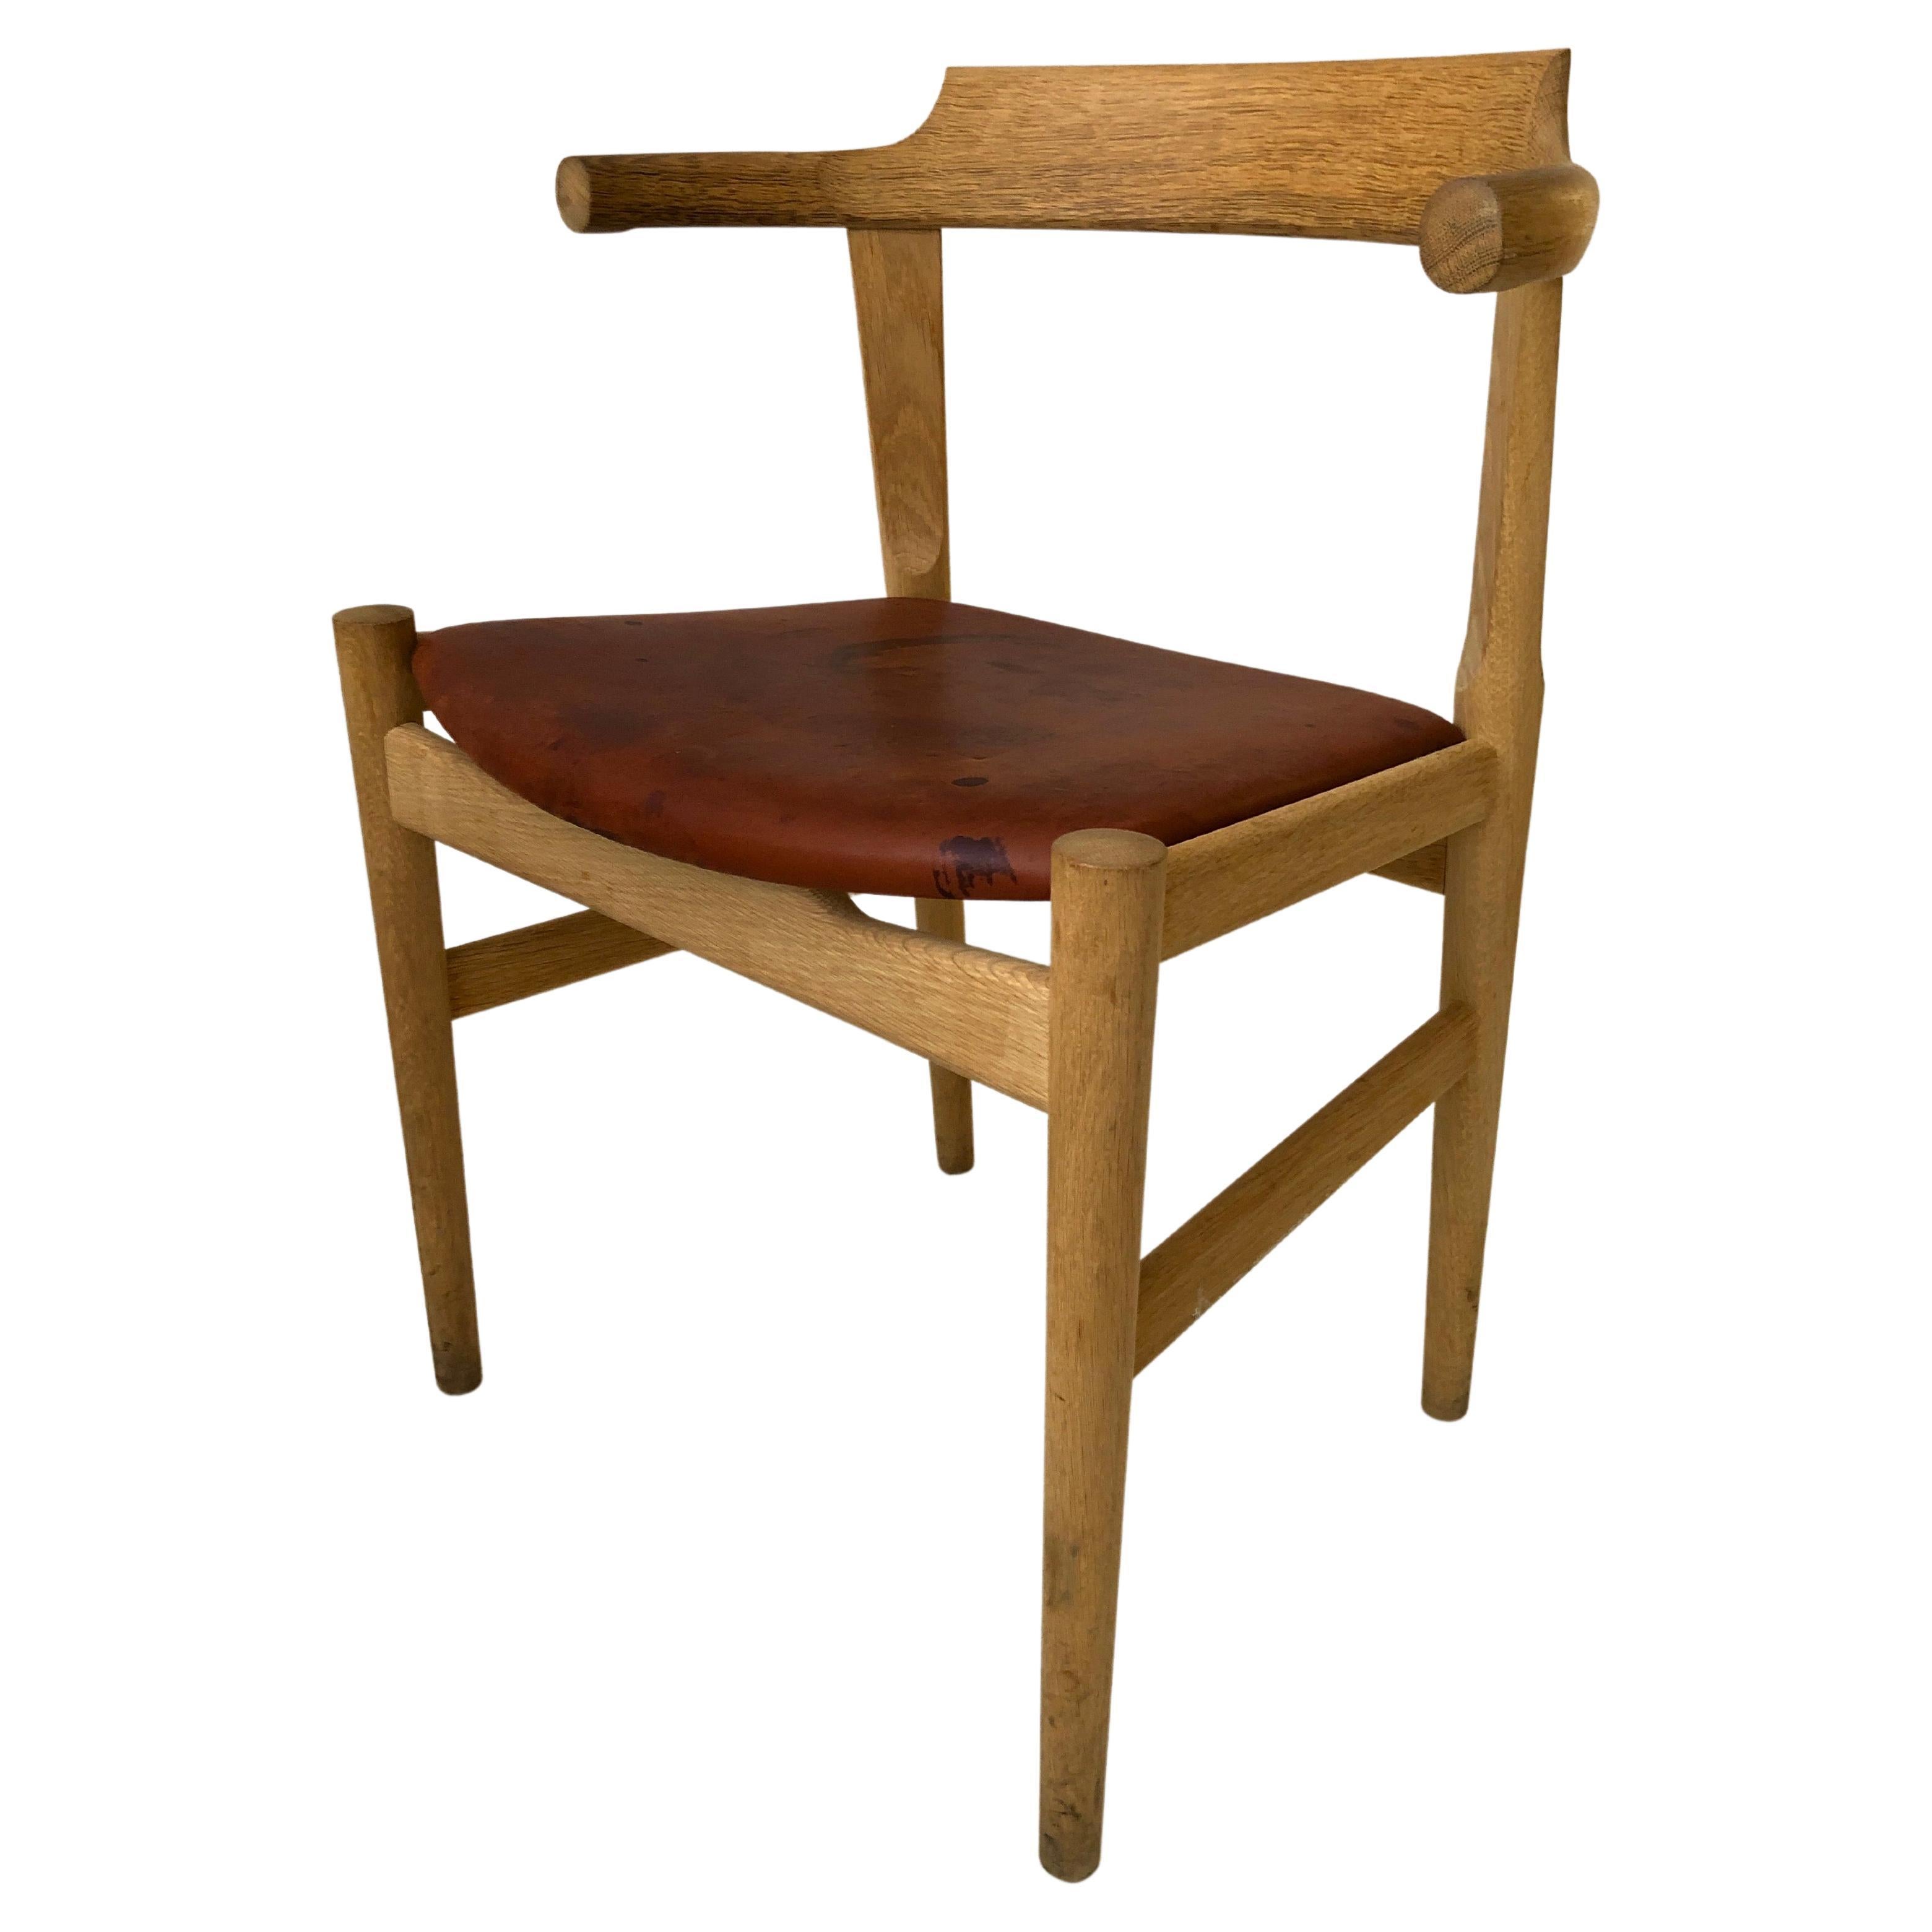 PP 68 Final Chair by Hans Wegner, with Leather Seat